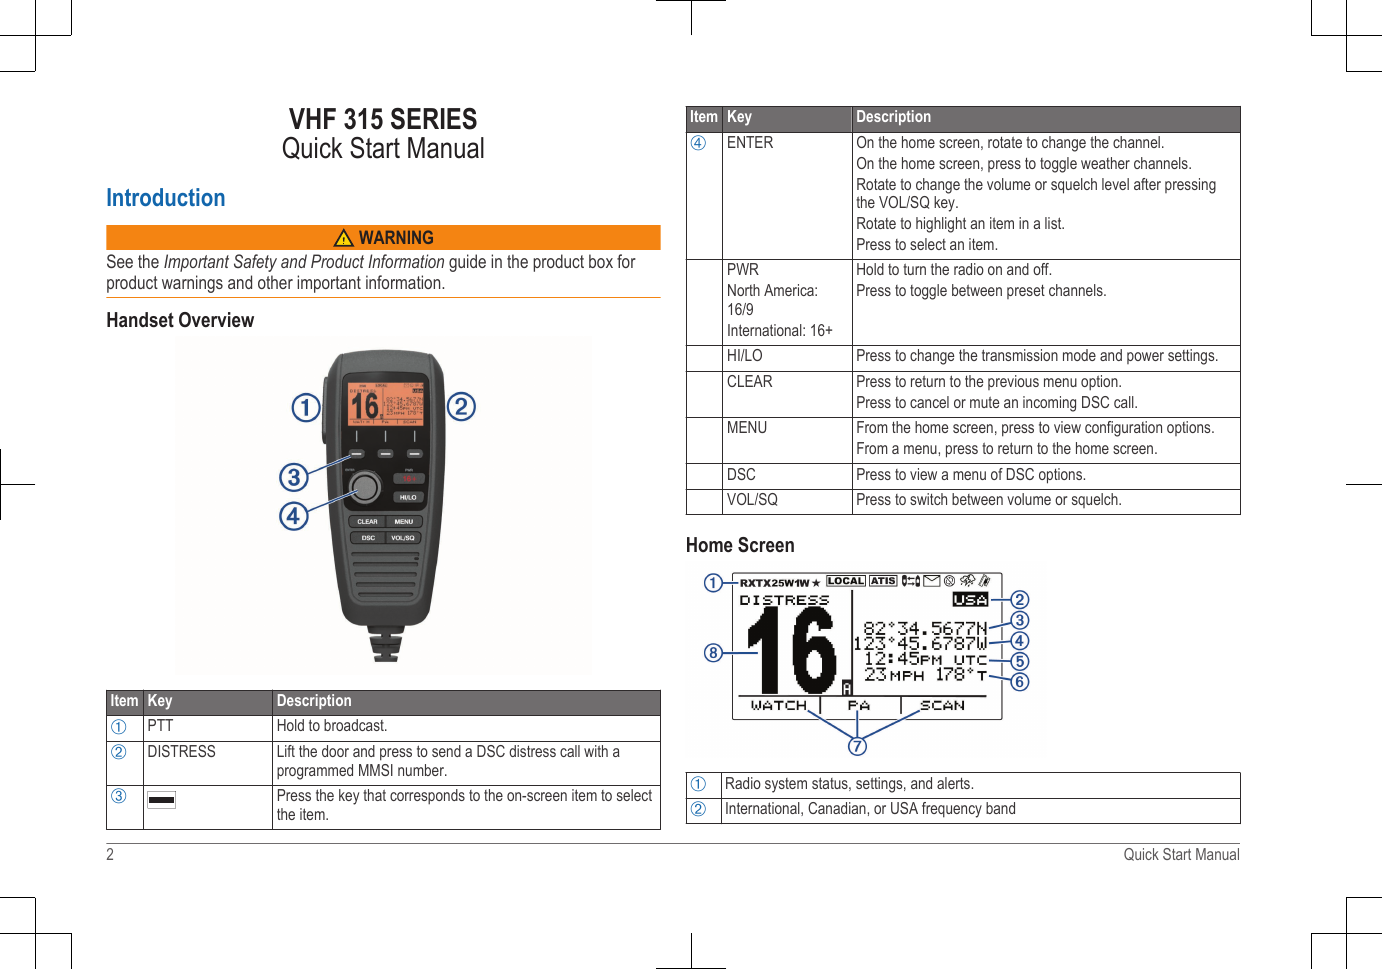 VHF 315 SERIESQuick Start ManualIntroduction WARNINGSee the Important Safety and Product Information guide in the product box forproduct warnings and other important information.Handset OverviewItem Key DescriptionÀPTT Hold to broadcast.ÁDISTRESS Lift the door and press to send a DSC distress call with aprogrammed MMSI number.ÂPress the key that corresponds to the on-screen item to selectthe item.Item Key DescriptionÃENTER On the home screen, rotate to change the channel.On the home screen, press to toggle weather channels.Rotate to change the volume or squelch level after pressingthe VOL/SQ key.Rotate to highlight an item in a list.Press to select an item.PWRNorth America:16/9International: 16+Hold to turn the radio on and off.Press to toggle between preset channels.HI/LO Press to change the transmission mode and power settings.CLEAR Press to return to the previous menu option.Press to cancel or mute an incoming DSC call.MENU From the home screen, press to view configuration options.From a menu, press to return to the home screen.DSC Press to view a menu of DSC options.VOL/SQ Press to switch between volume or squelch.Home ScreenÀRadio system status, settings, and alerts.ÁInternational, Canadian, or USA frequency band2 Quick Start Manual